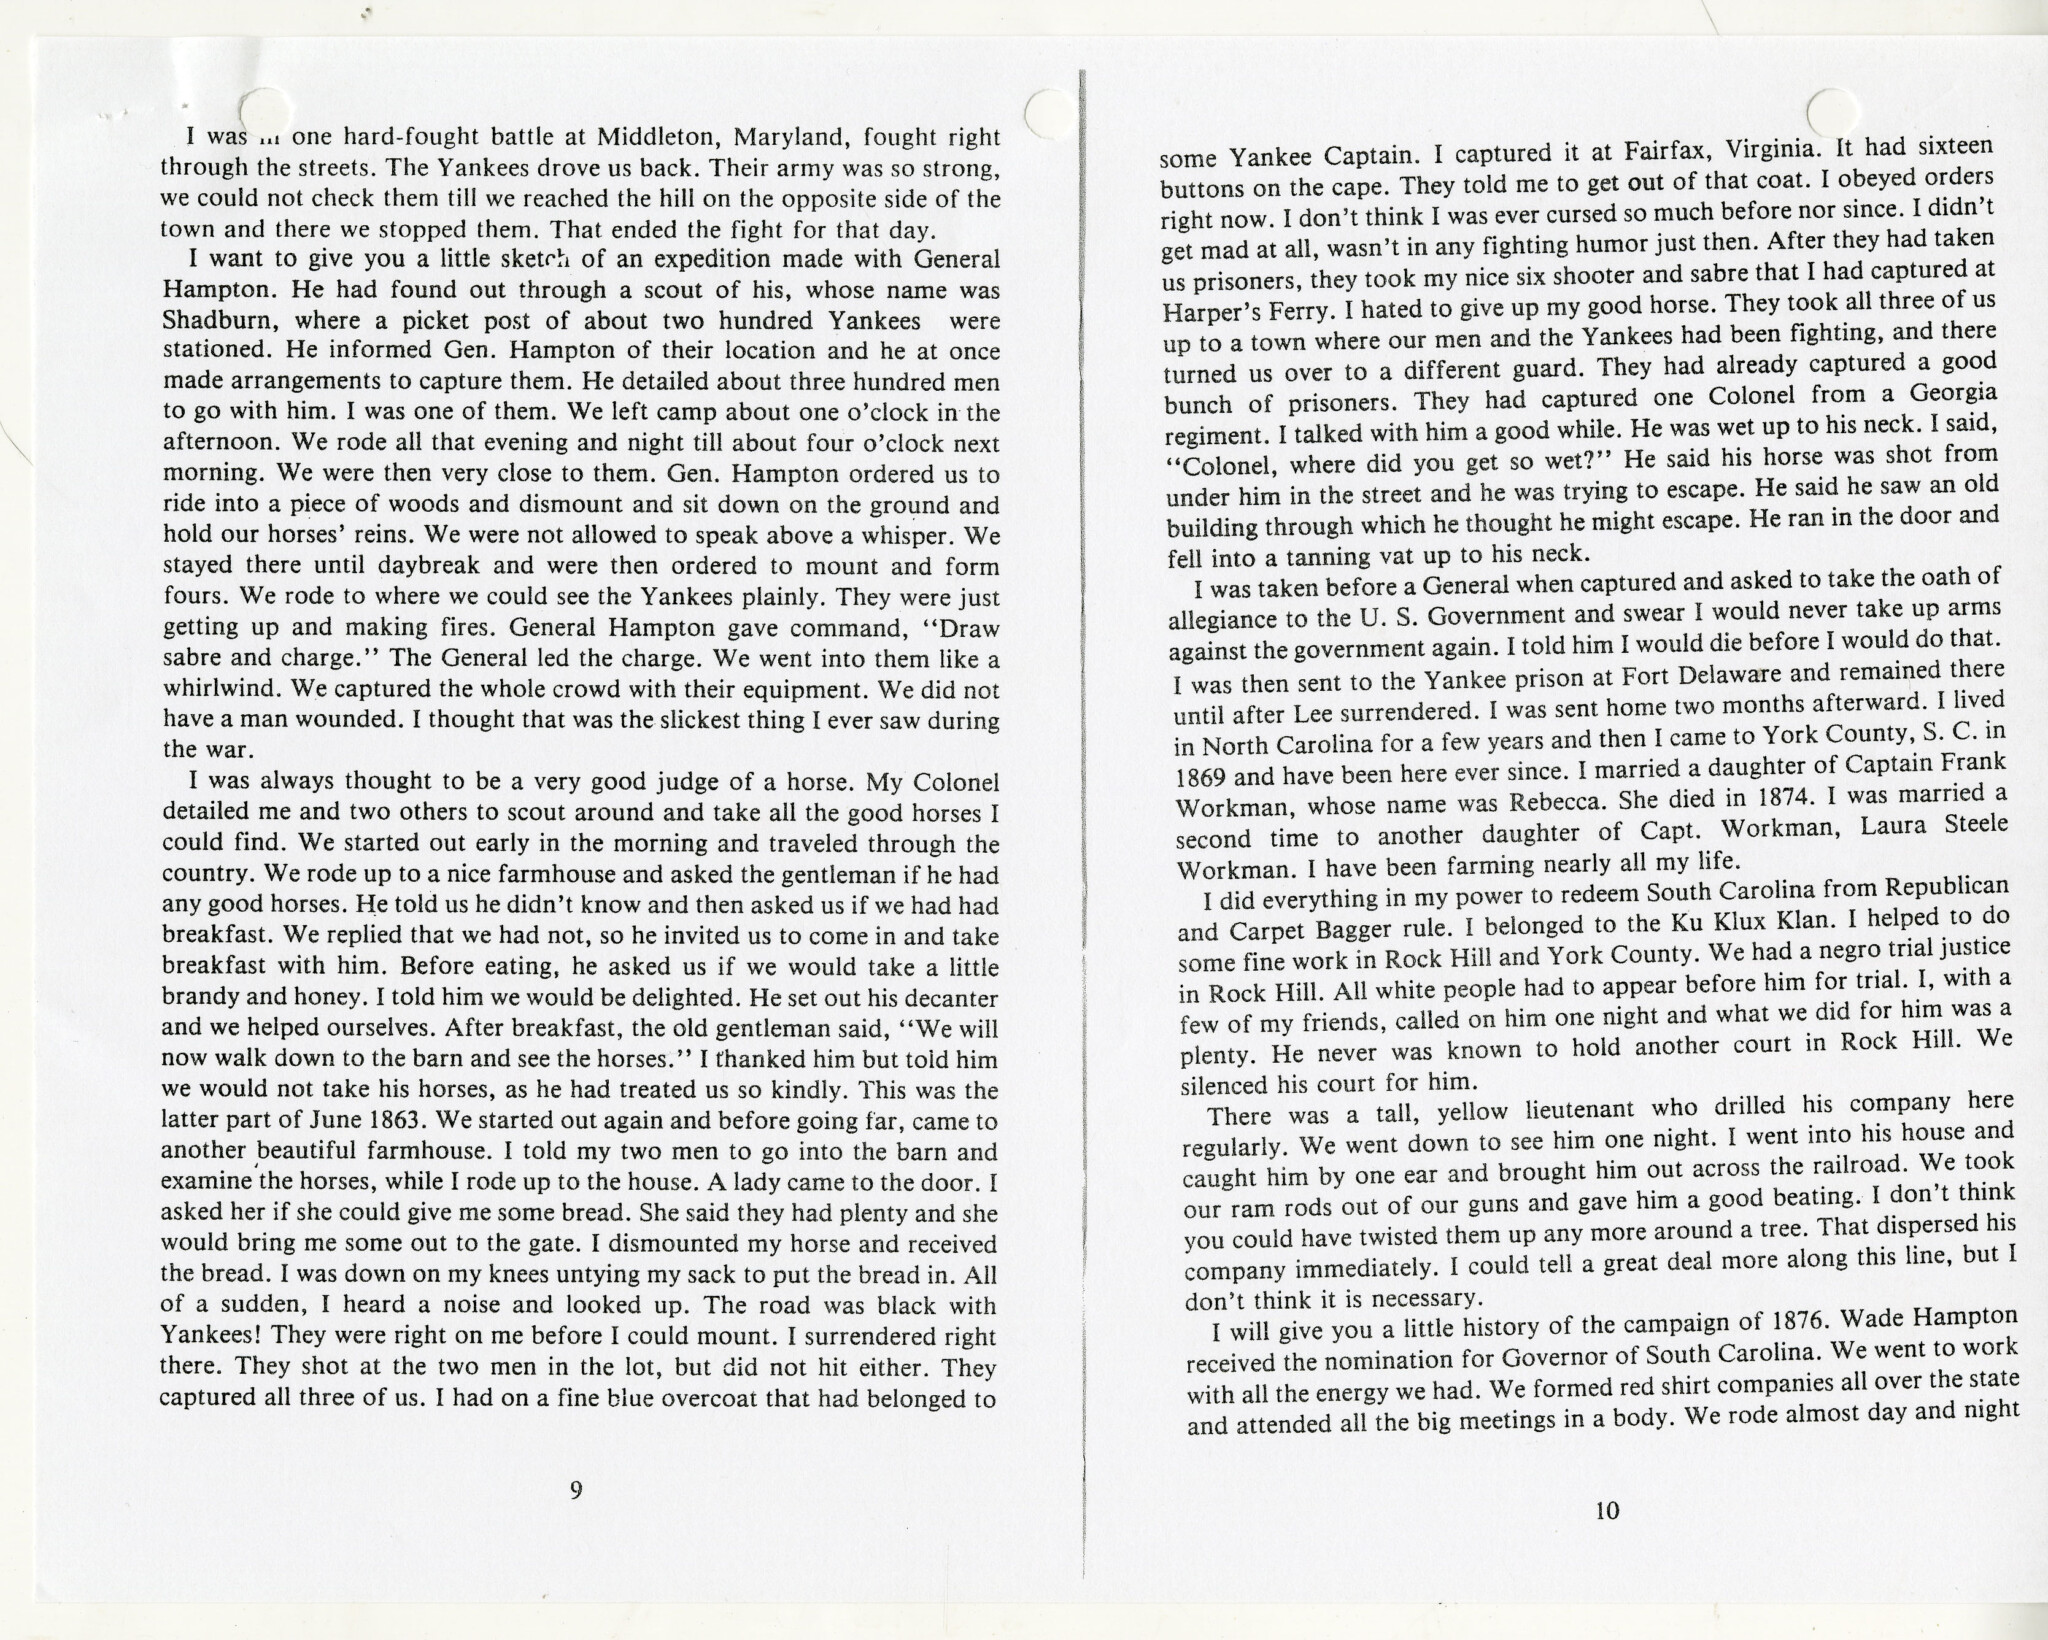 HISTORY OF THE WAR AND THE LOCAL KKK - Wm. B. White Collection - WU Pettus Archives p. 2